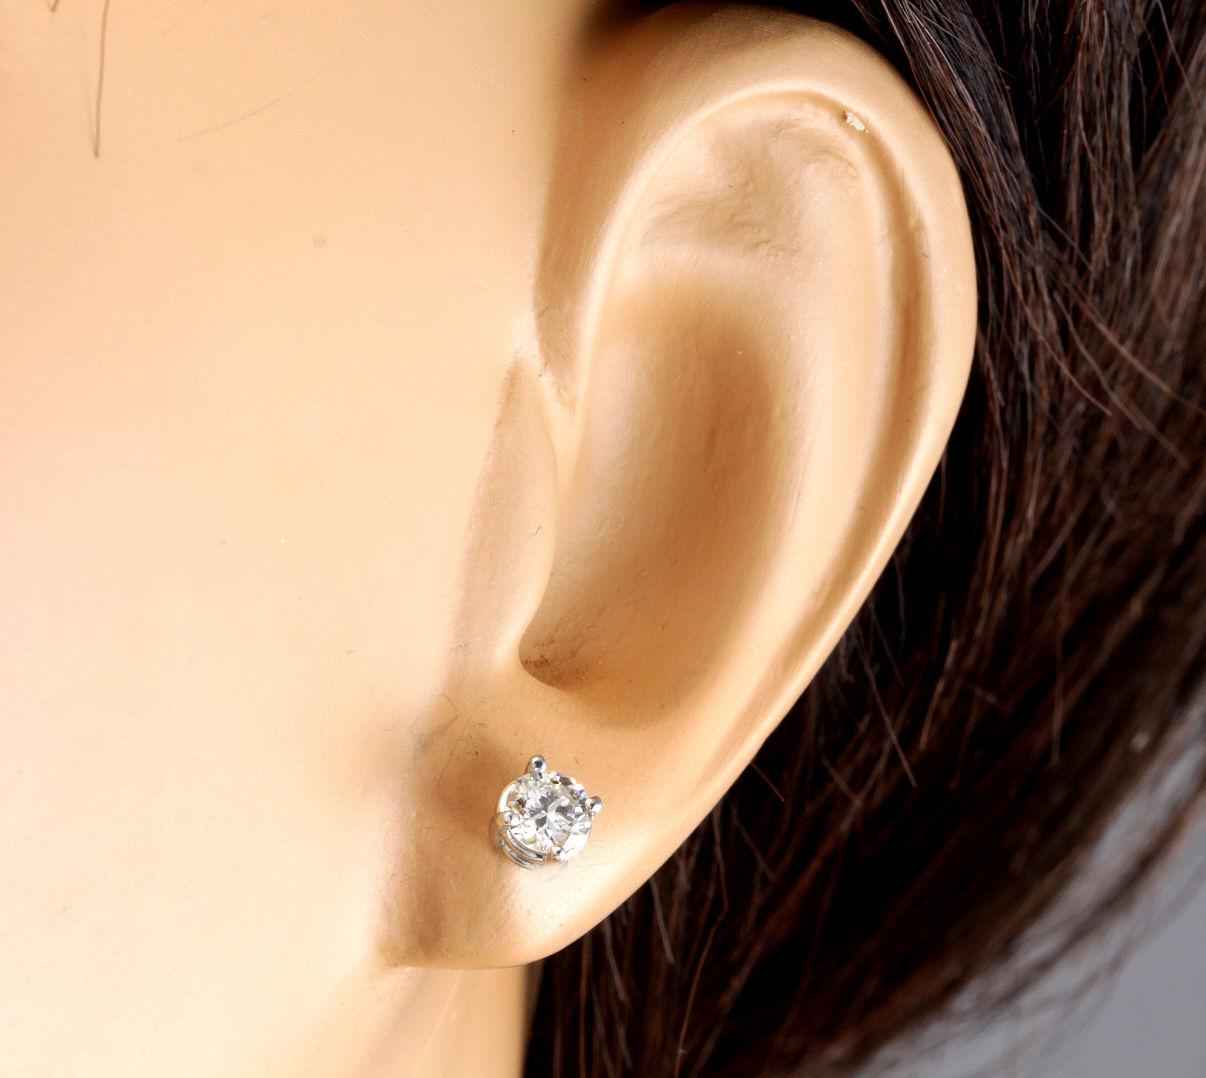 Women's Exquisite 1.40 Carat Natural Diamond 14 Karat Solid White Gold Stud Earrings For Sale